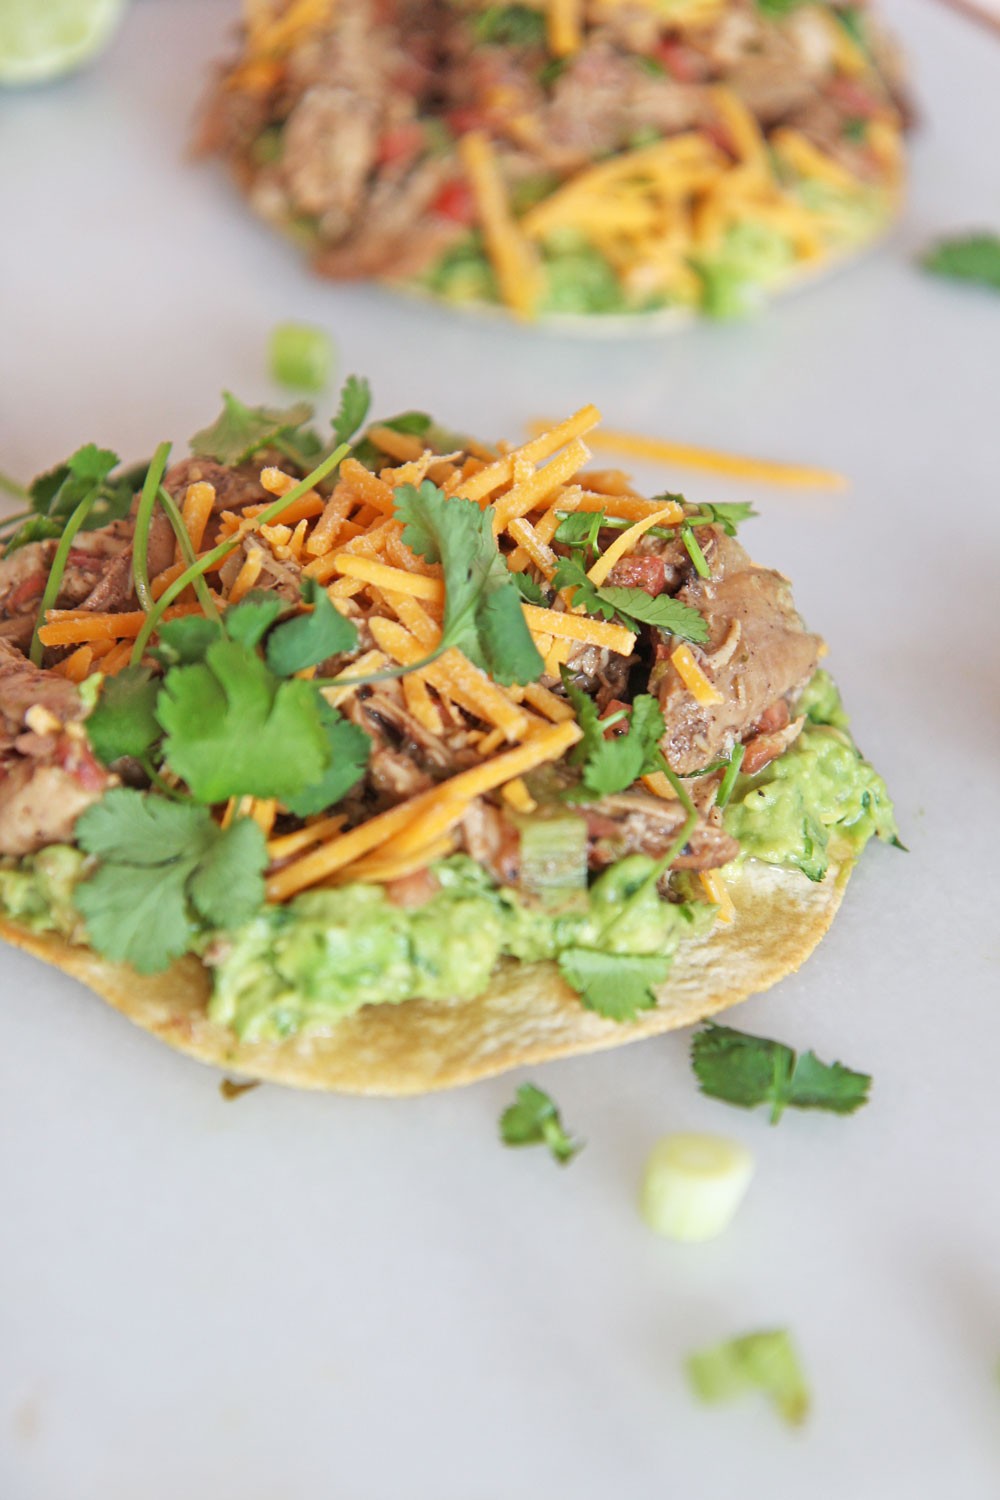 15 Minute Salsa Chicken Tostada Recipe. Grab your corn tortilla, rotisserie chicken, salsa, avocado, and cheese. This is baked in the oven and fast weeknight smiles. Happy Cooking! www.ChopHappy.com #chickenrecipe #tostada